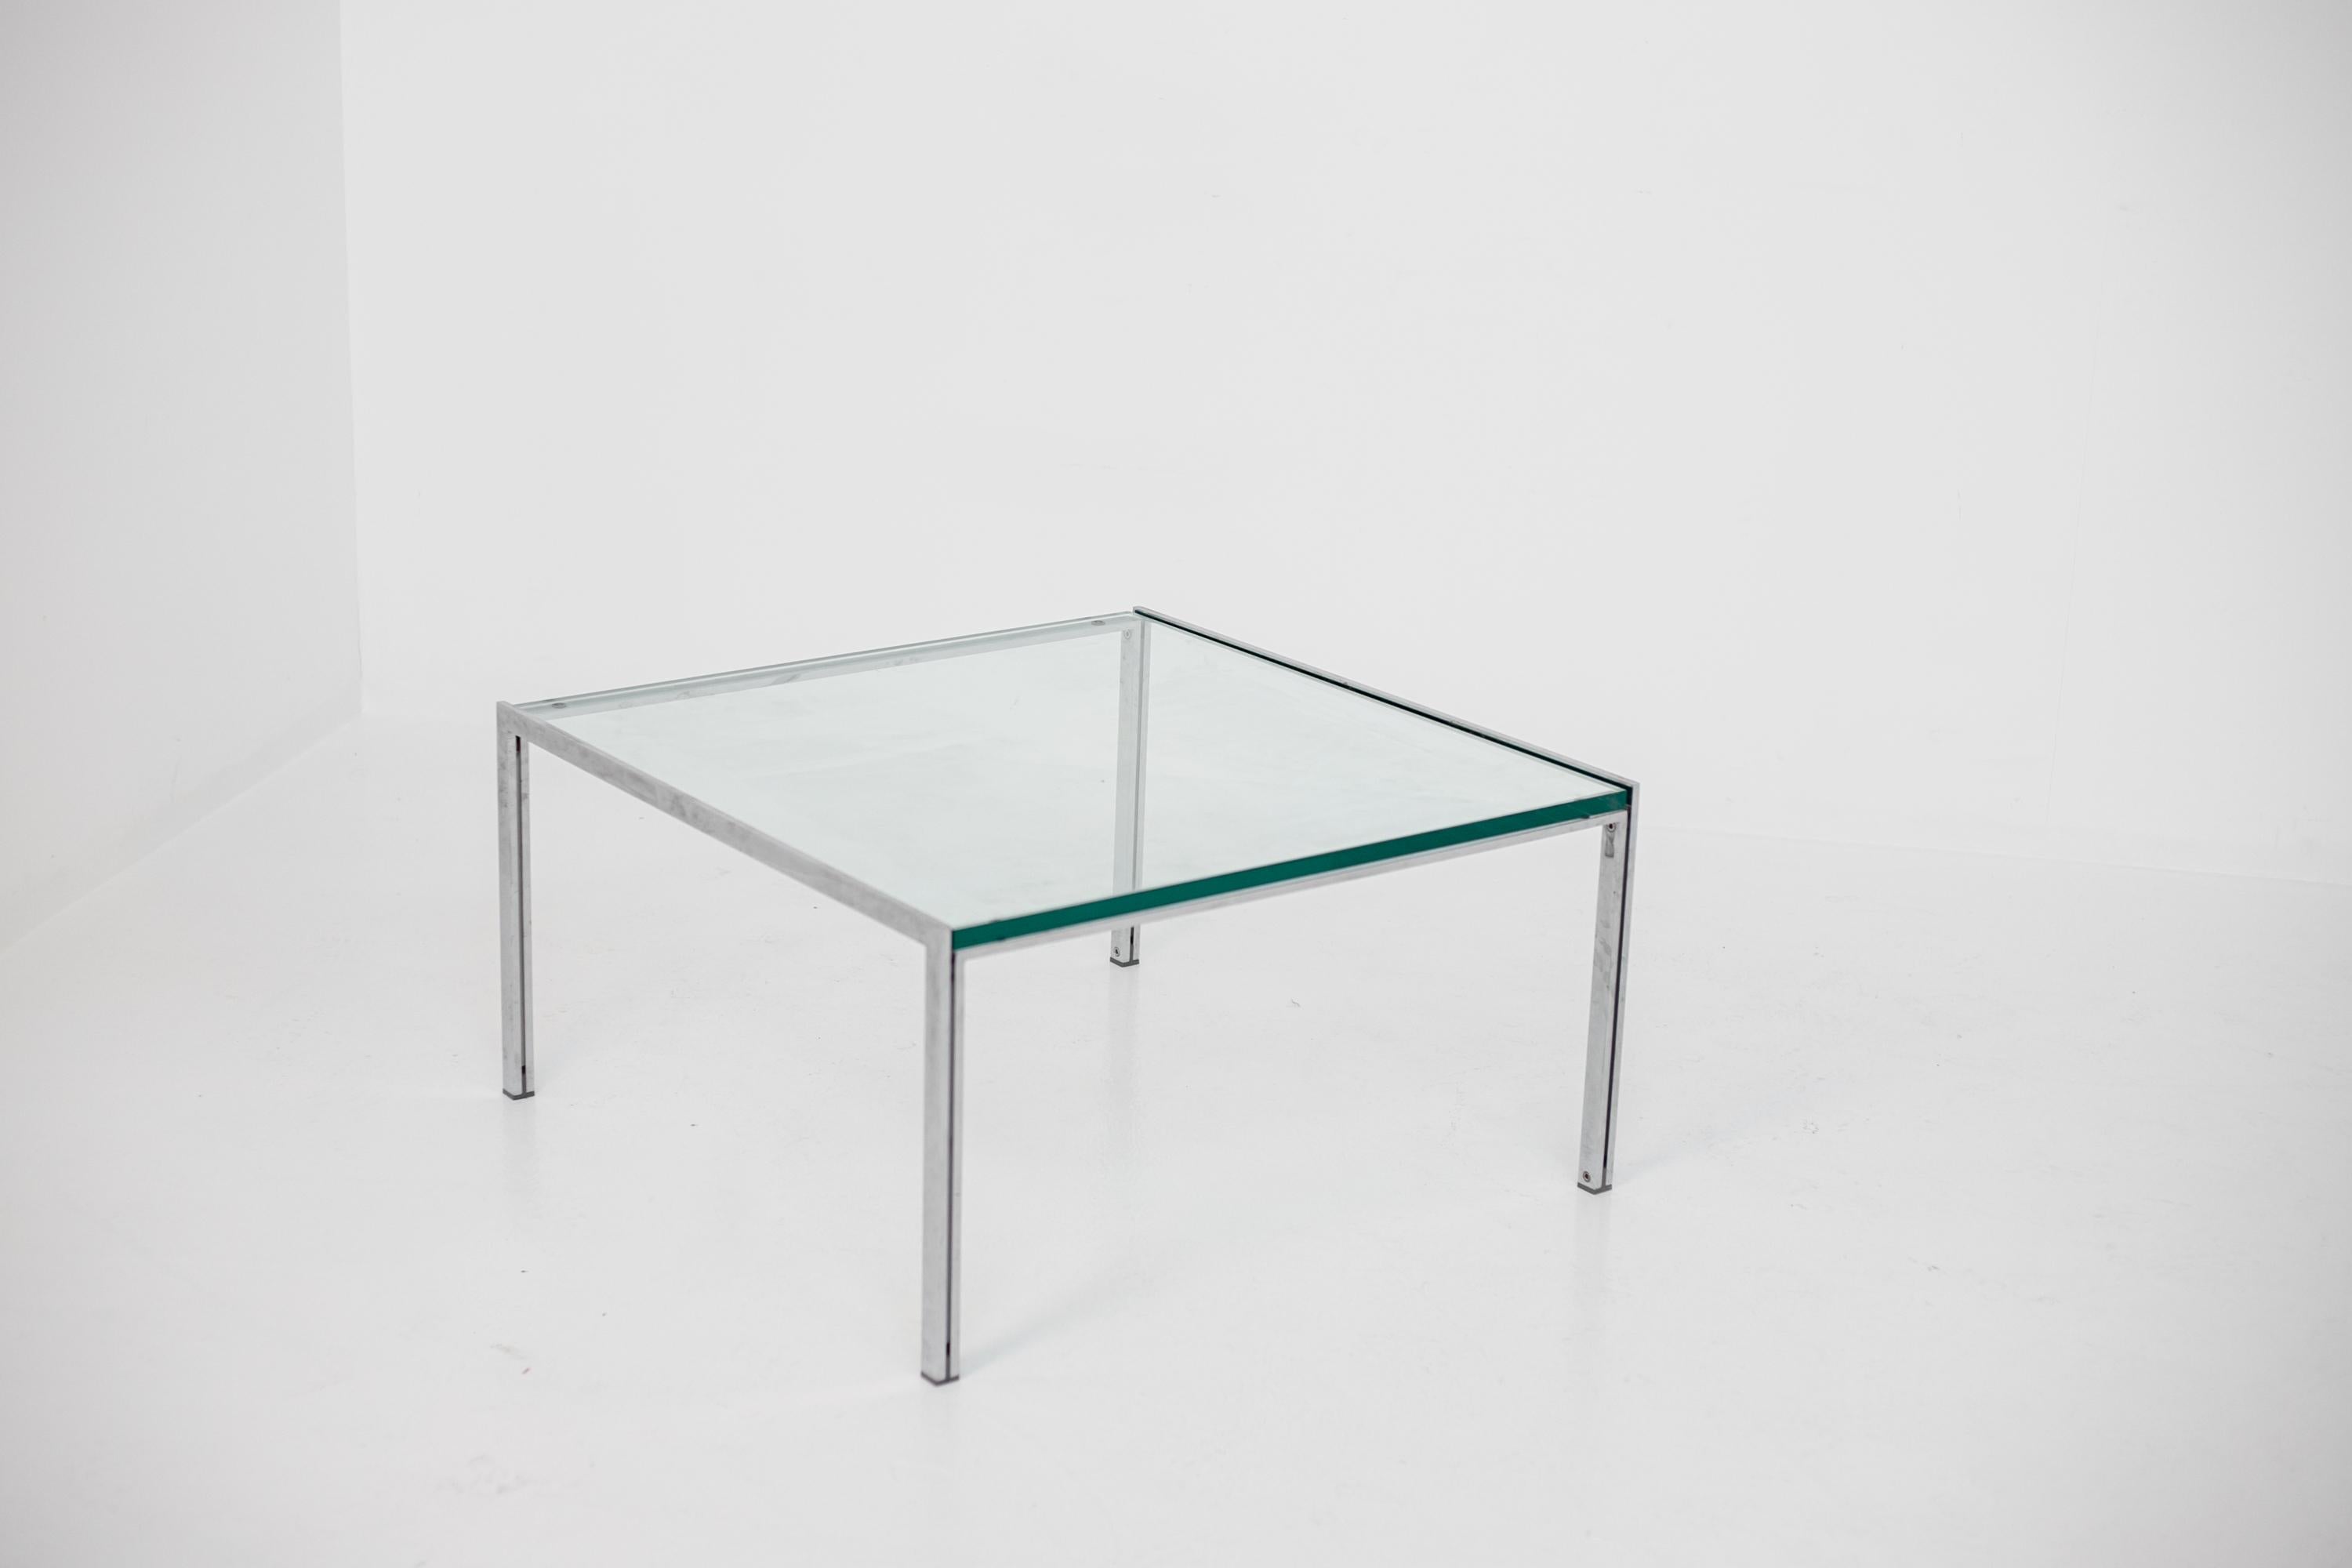 Coffee table from the 70's by Ross Little for ICF. The structure is made of steel with a square shape.
The top is made of 2 cm thick glass with a square shape. The coffee table is ideal as a side table or as a coffee table for modern and minimalist